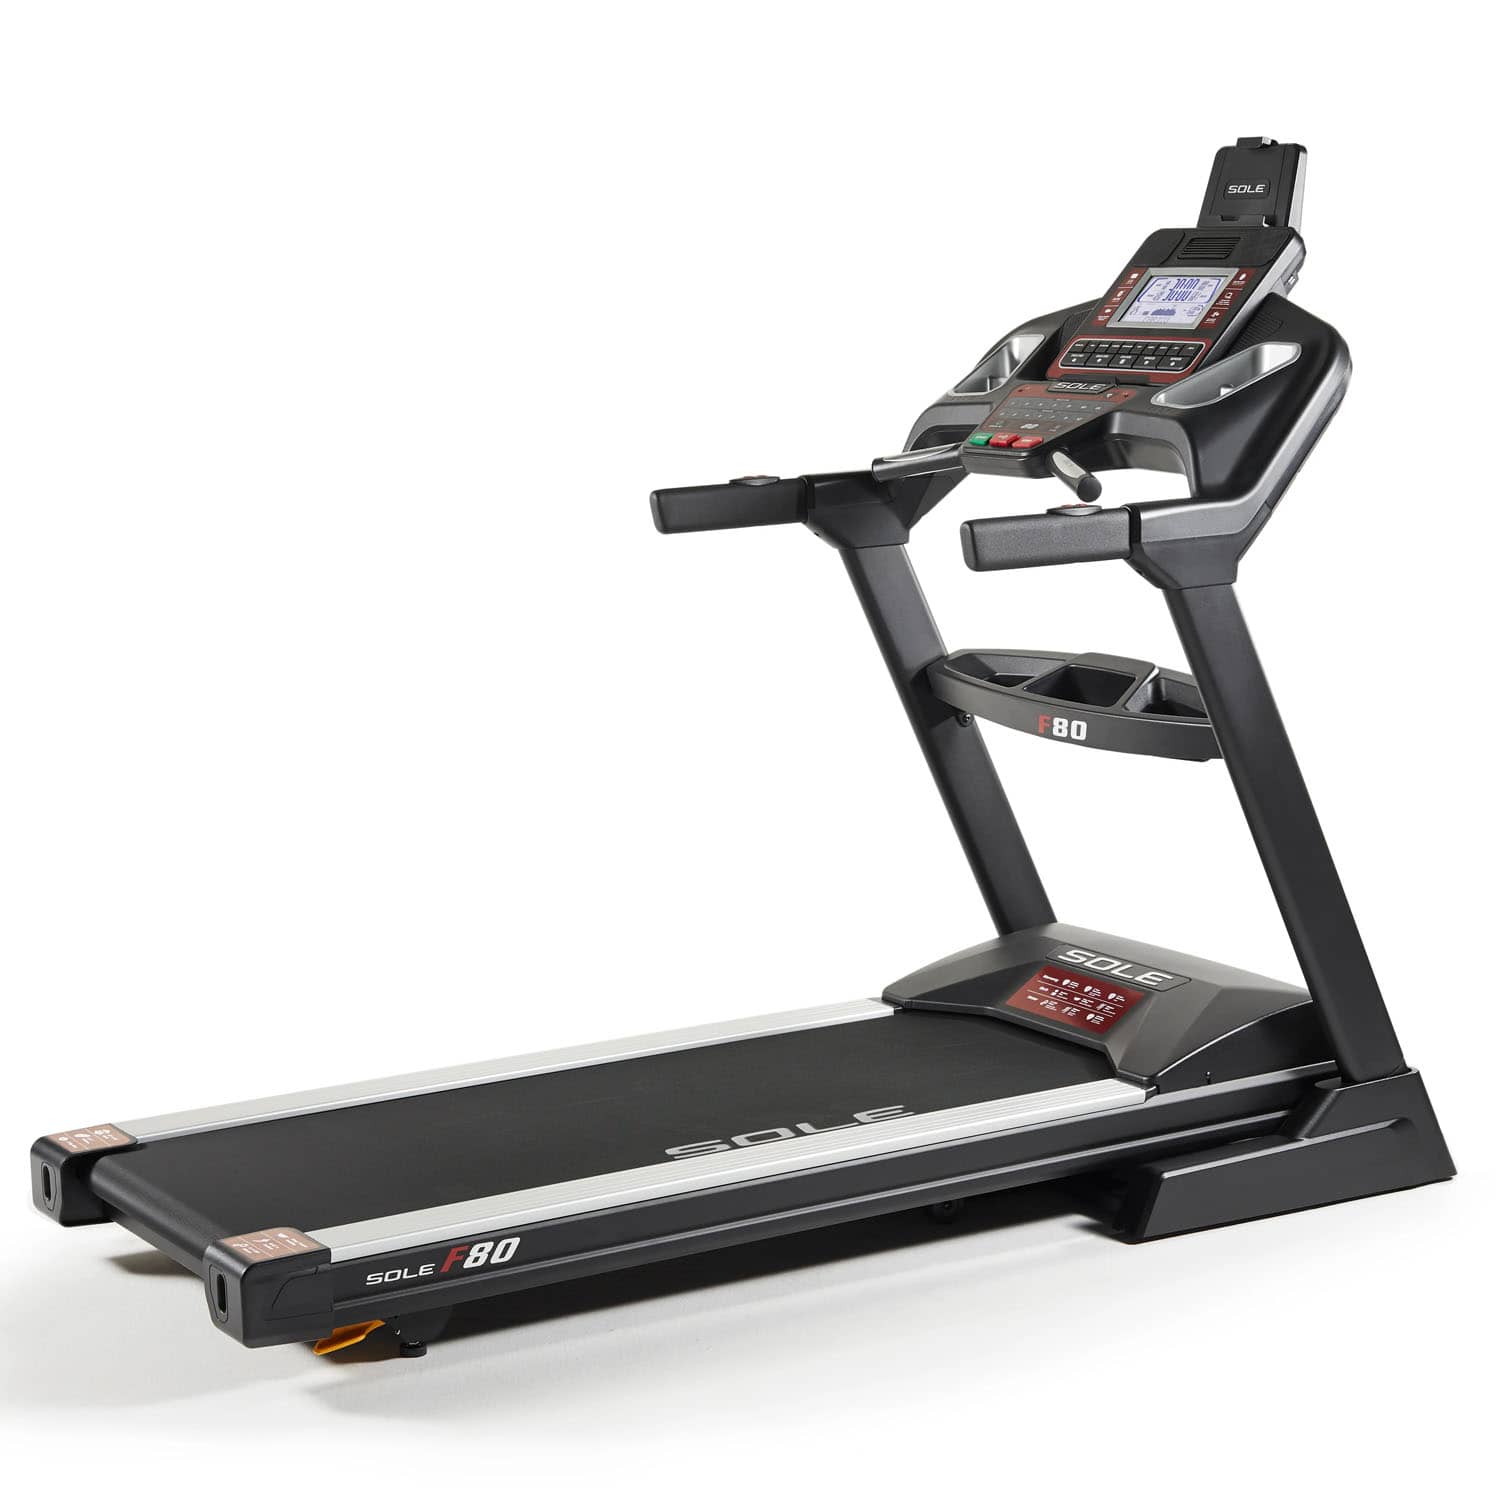 ARGT Sole Fitness F80 Home Use Treadmill